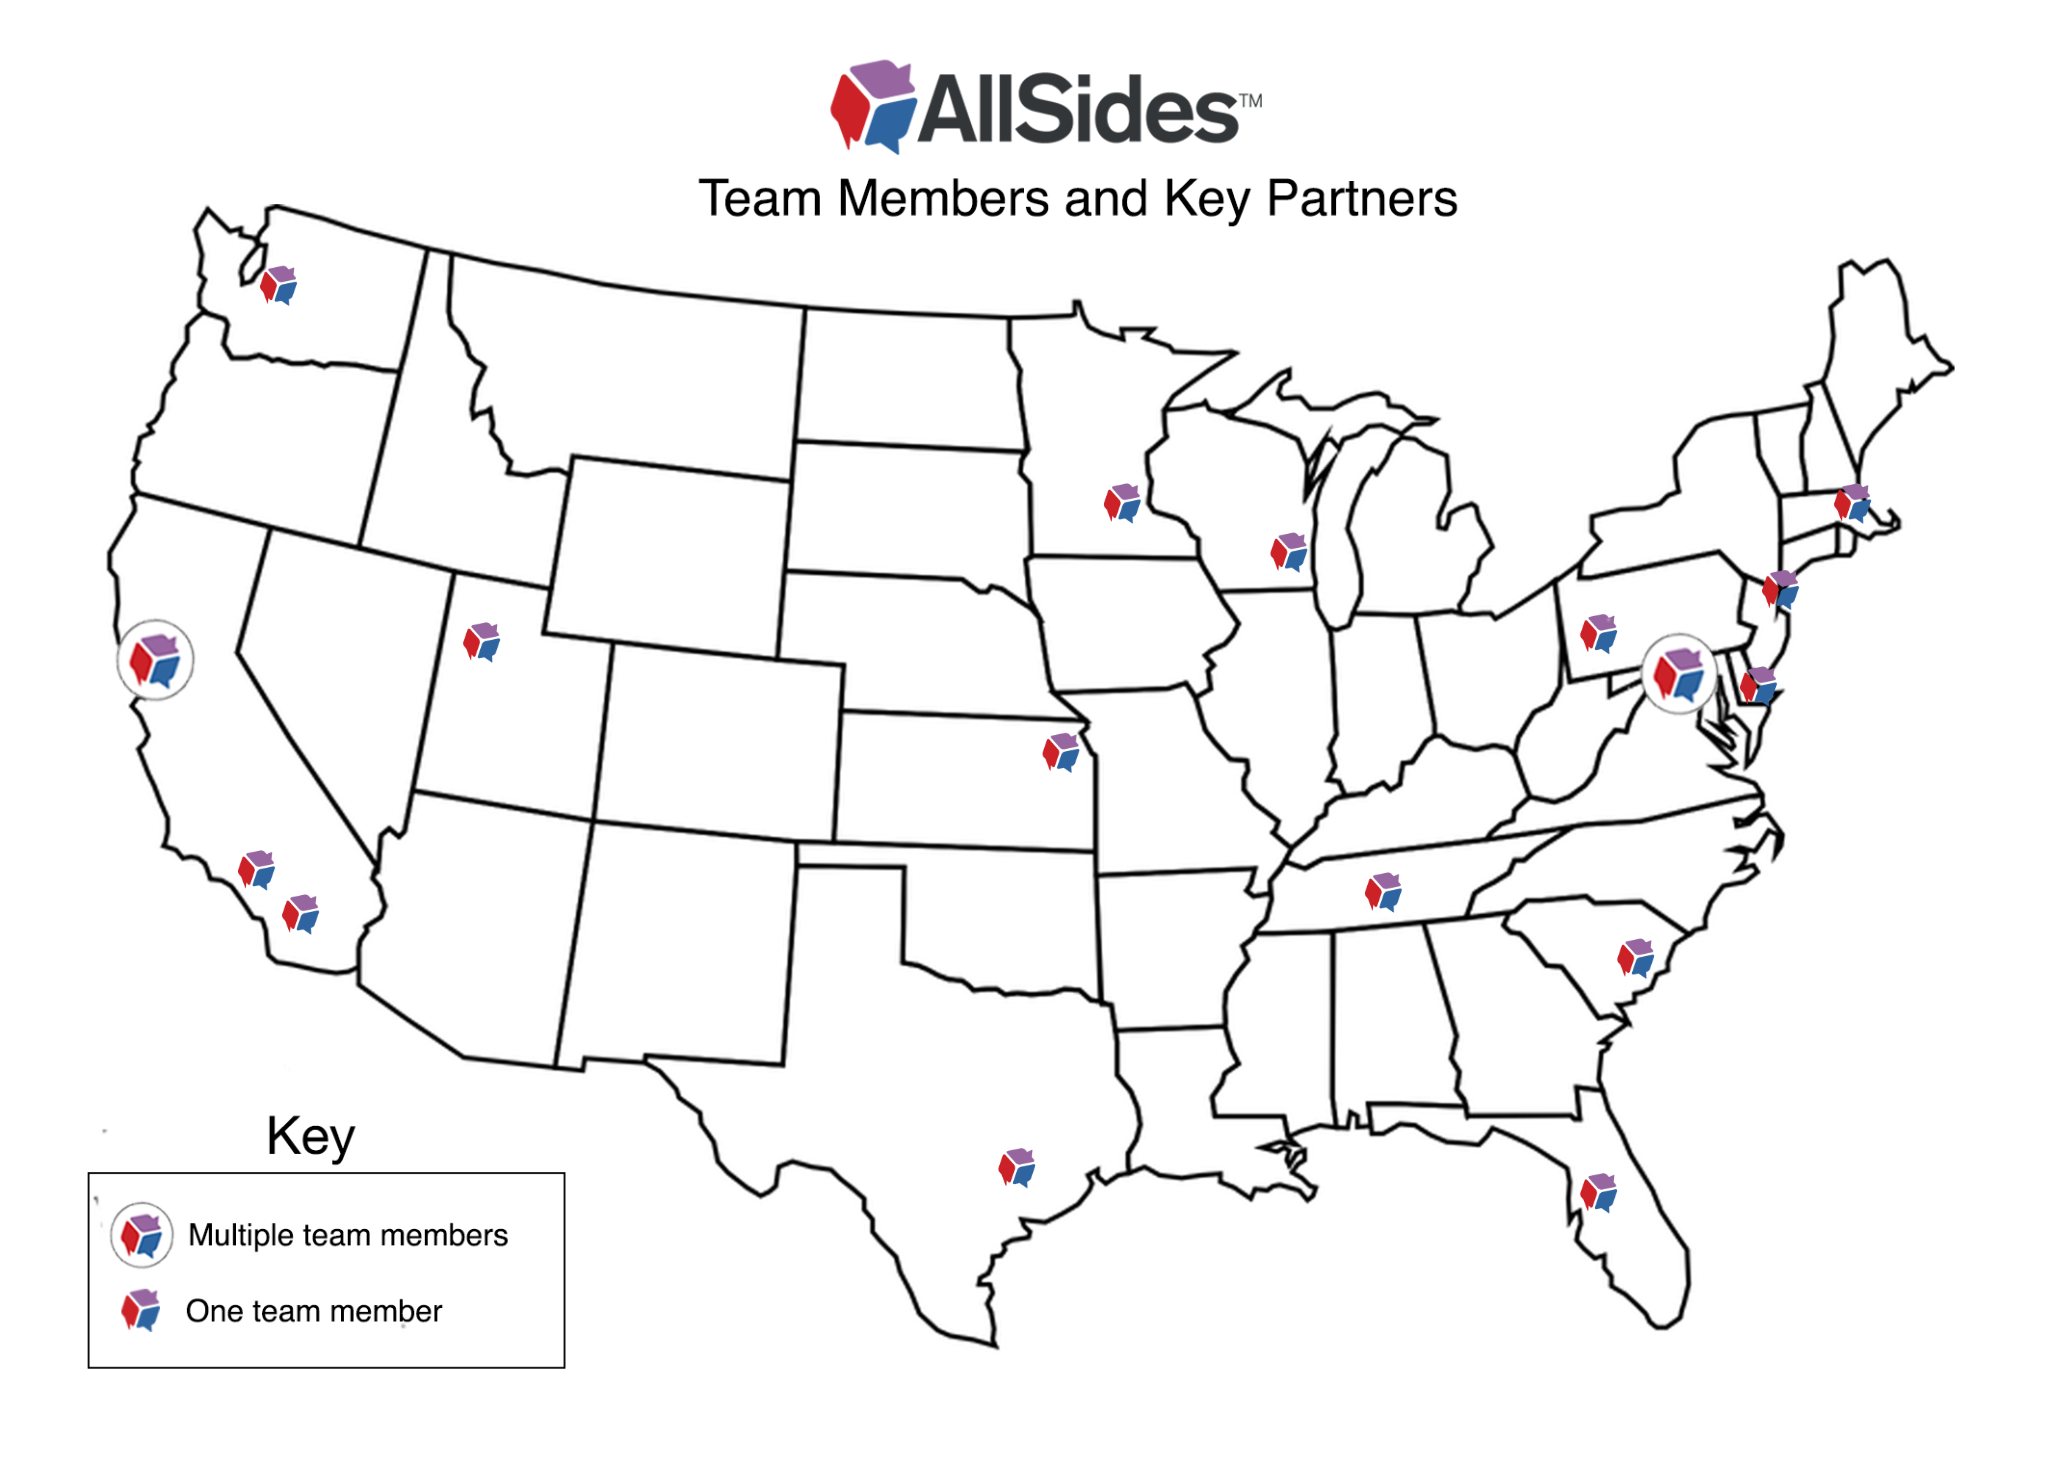 Map of the locations of AllSides Team Members and Key Partners across the United States